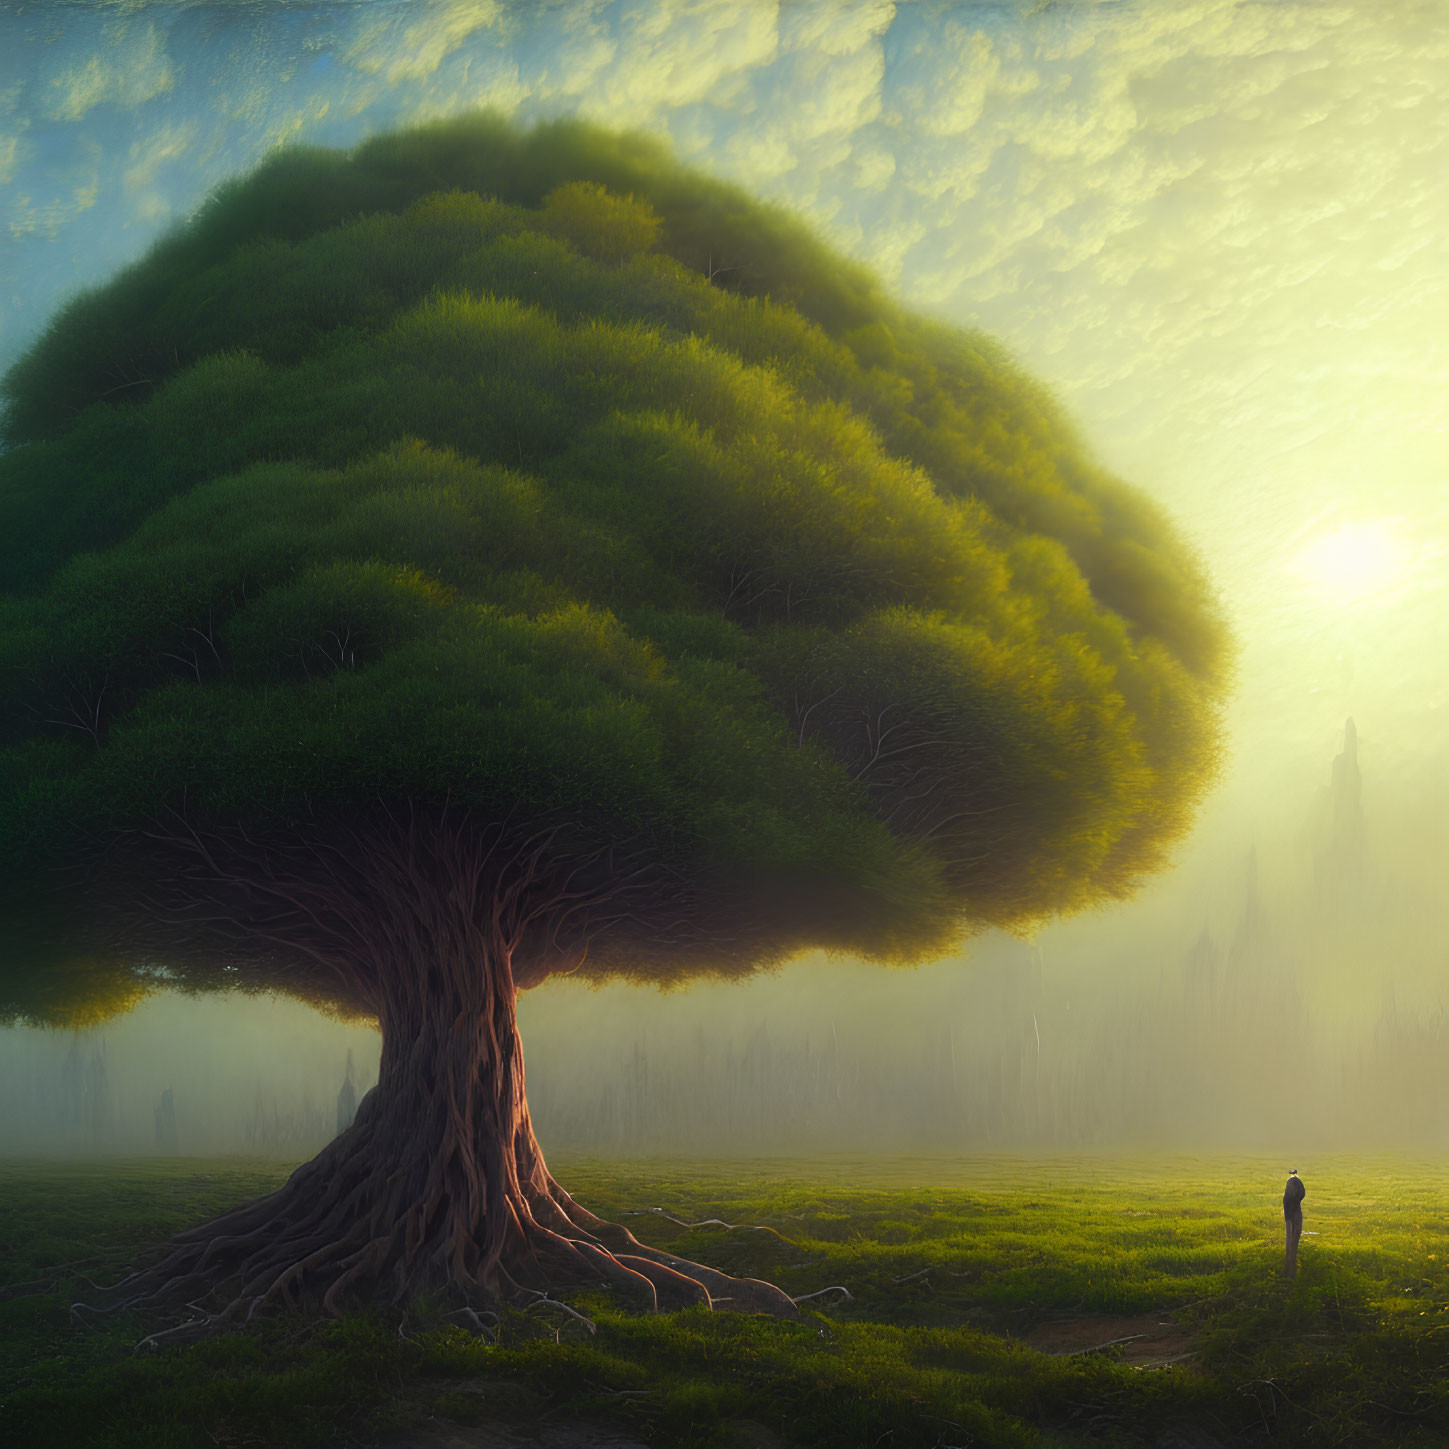 Solitary figure under giant tree in misty landscape at sunrise or sunset